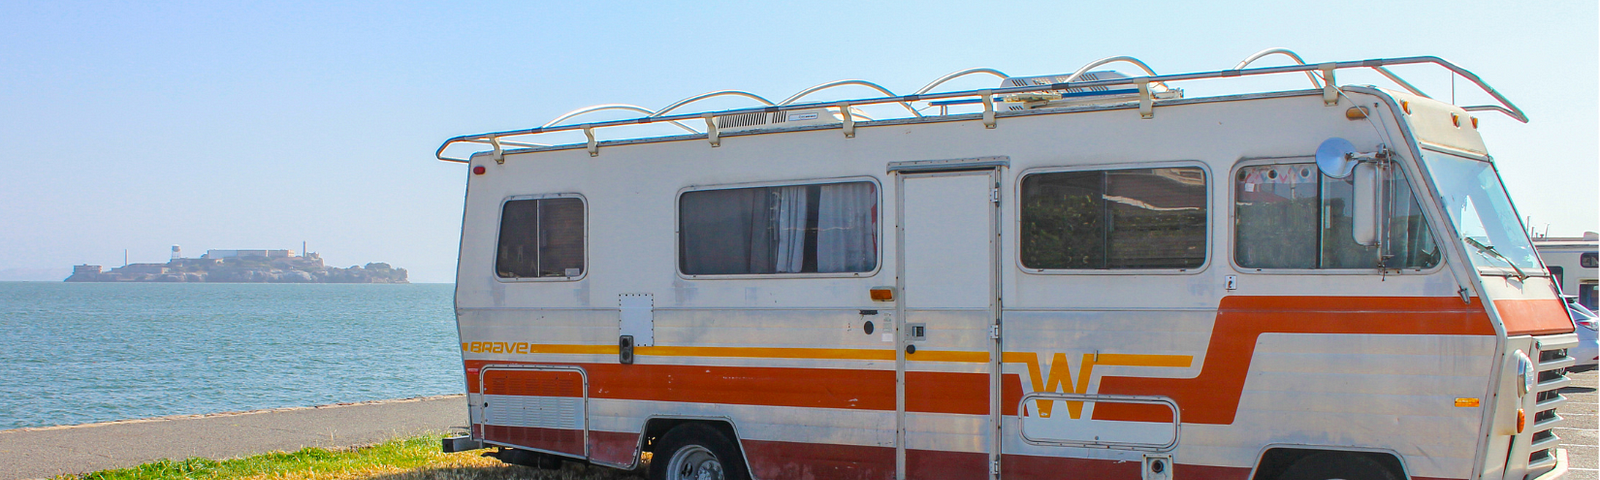 Old RV in a parking lot; alt-text for “I Had the Best Night’s Sleep in a Cracker Barrel Parking Lot”